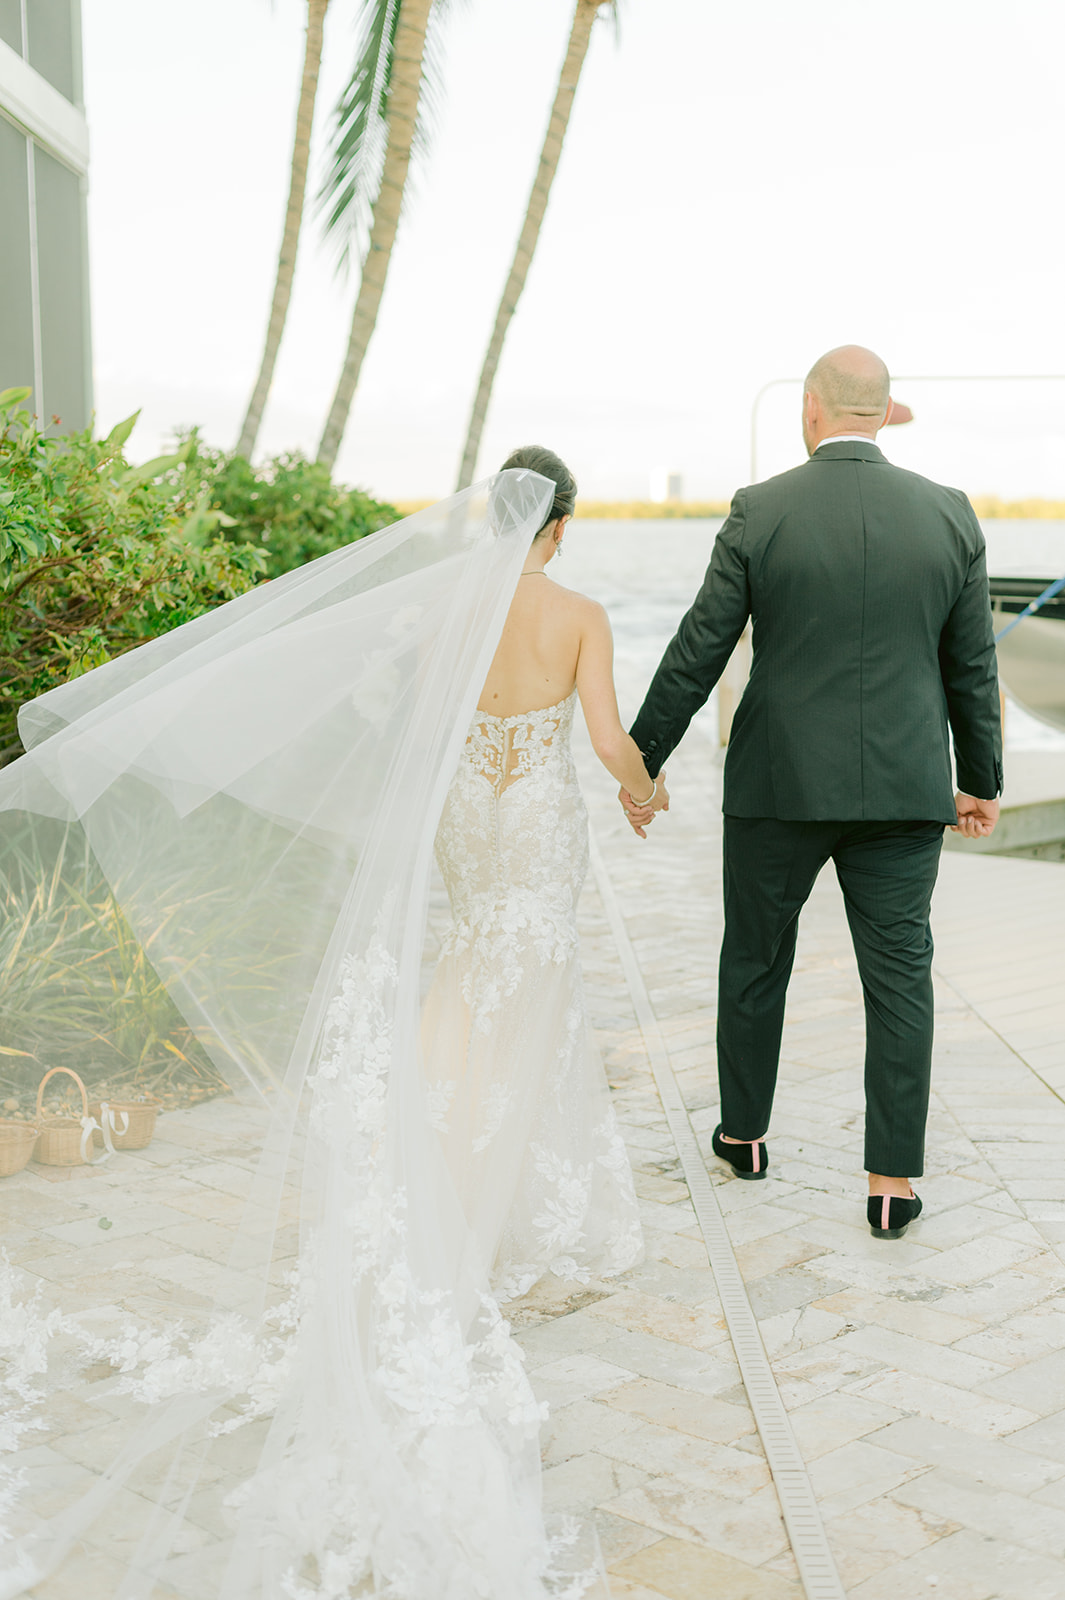 Marco Island Beach Wedding Photography - Unforgettable Memories by the Sea
